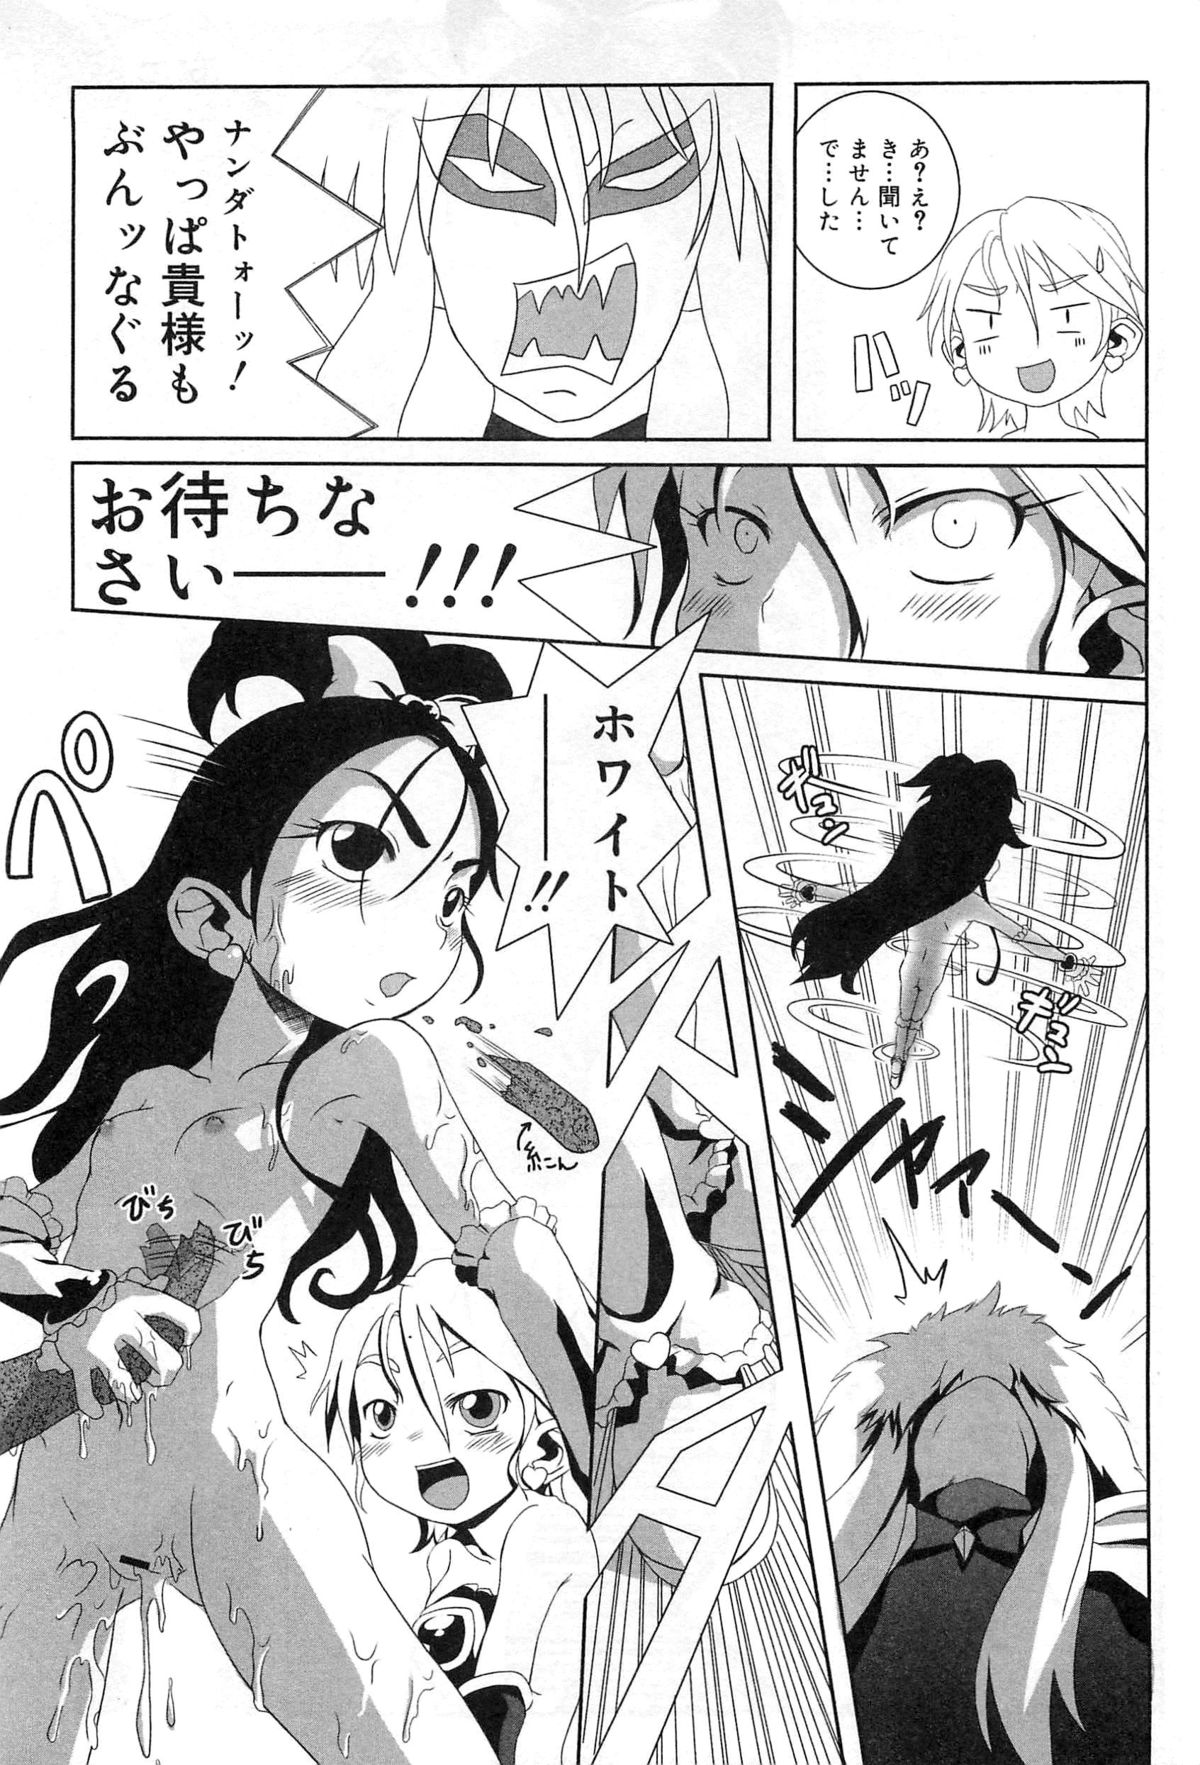 [Anthology] Cure Cure Battle Precure Eroparo page 25 full